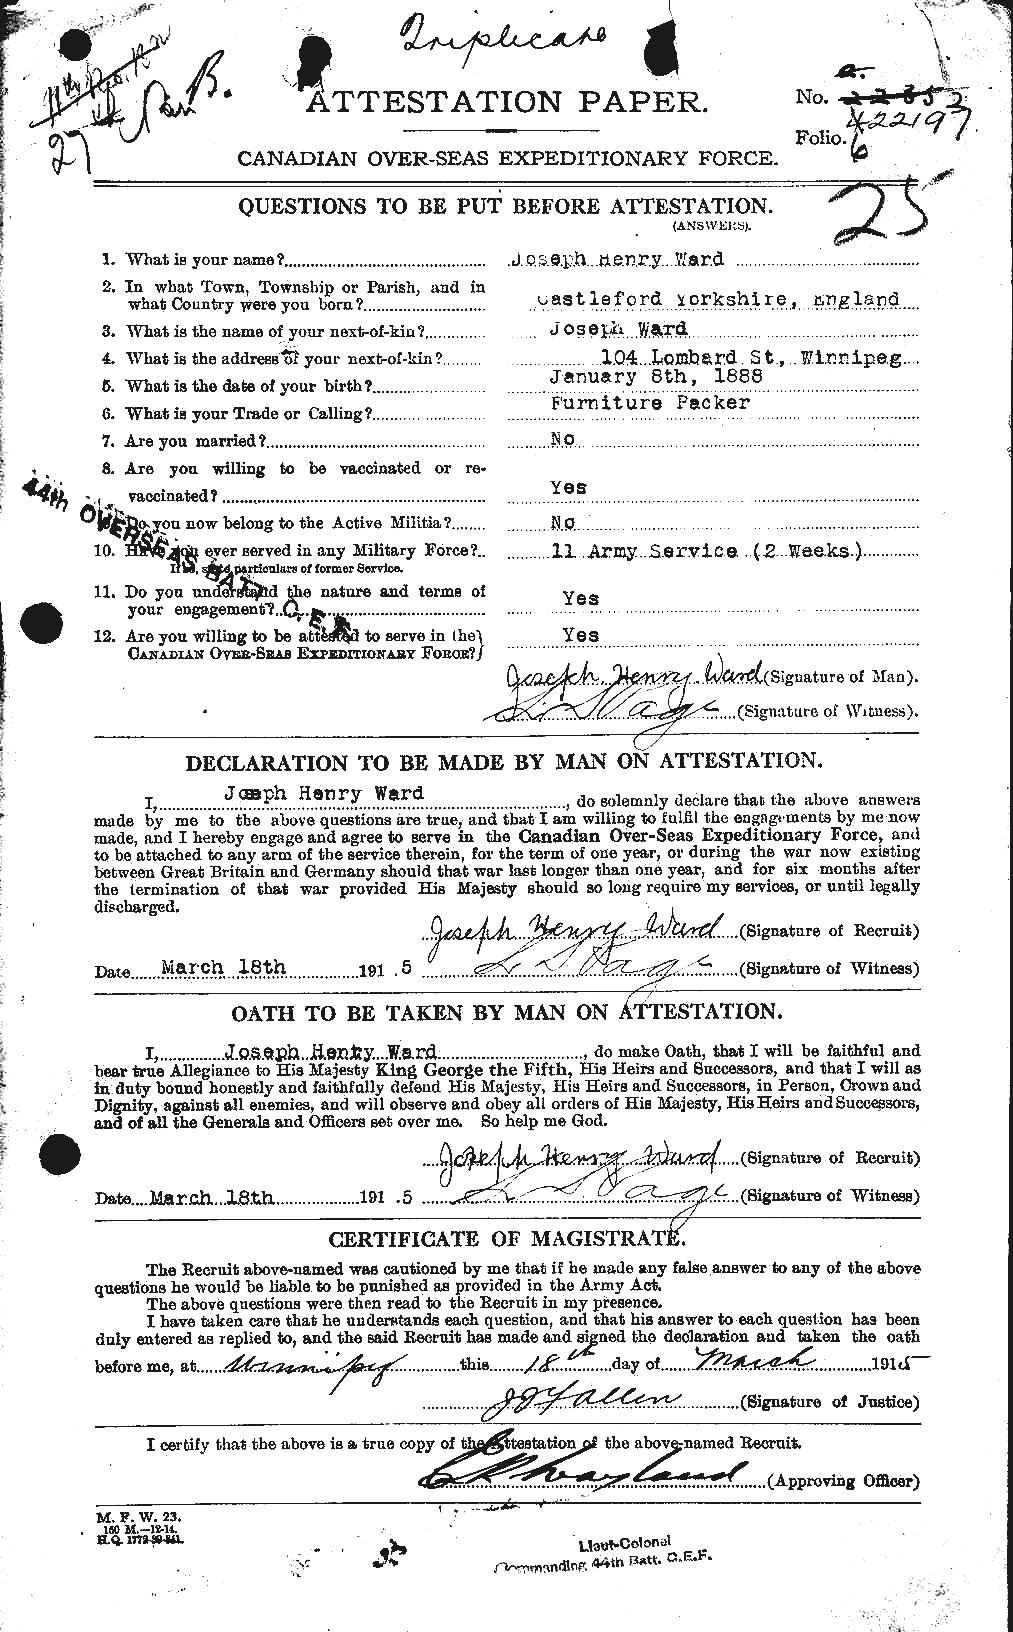 Personnel Records of the First World War - CEF 659567a